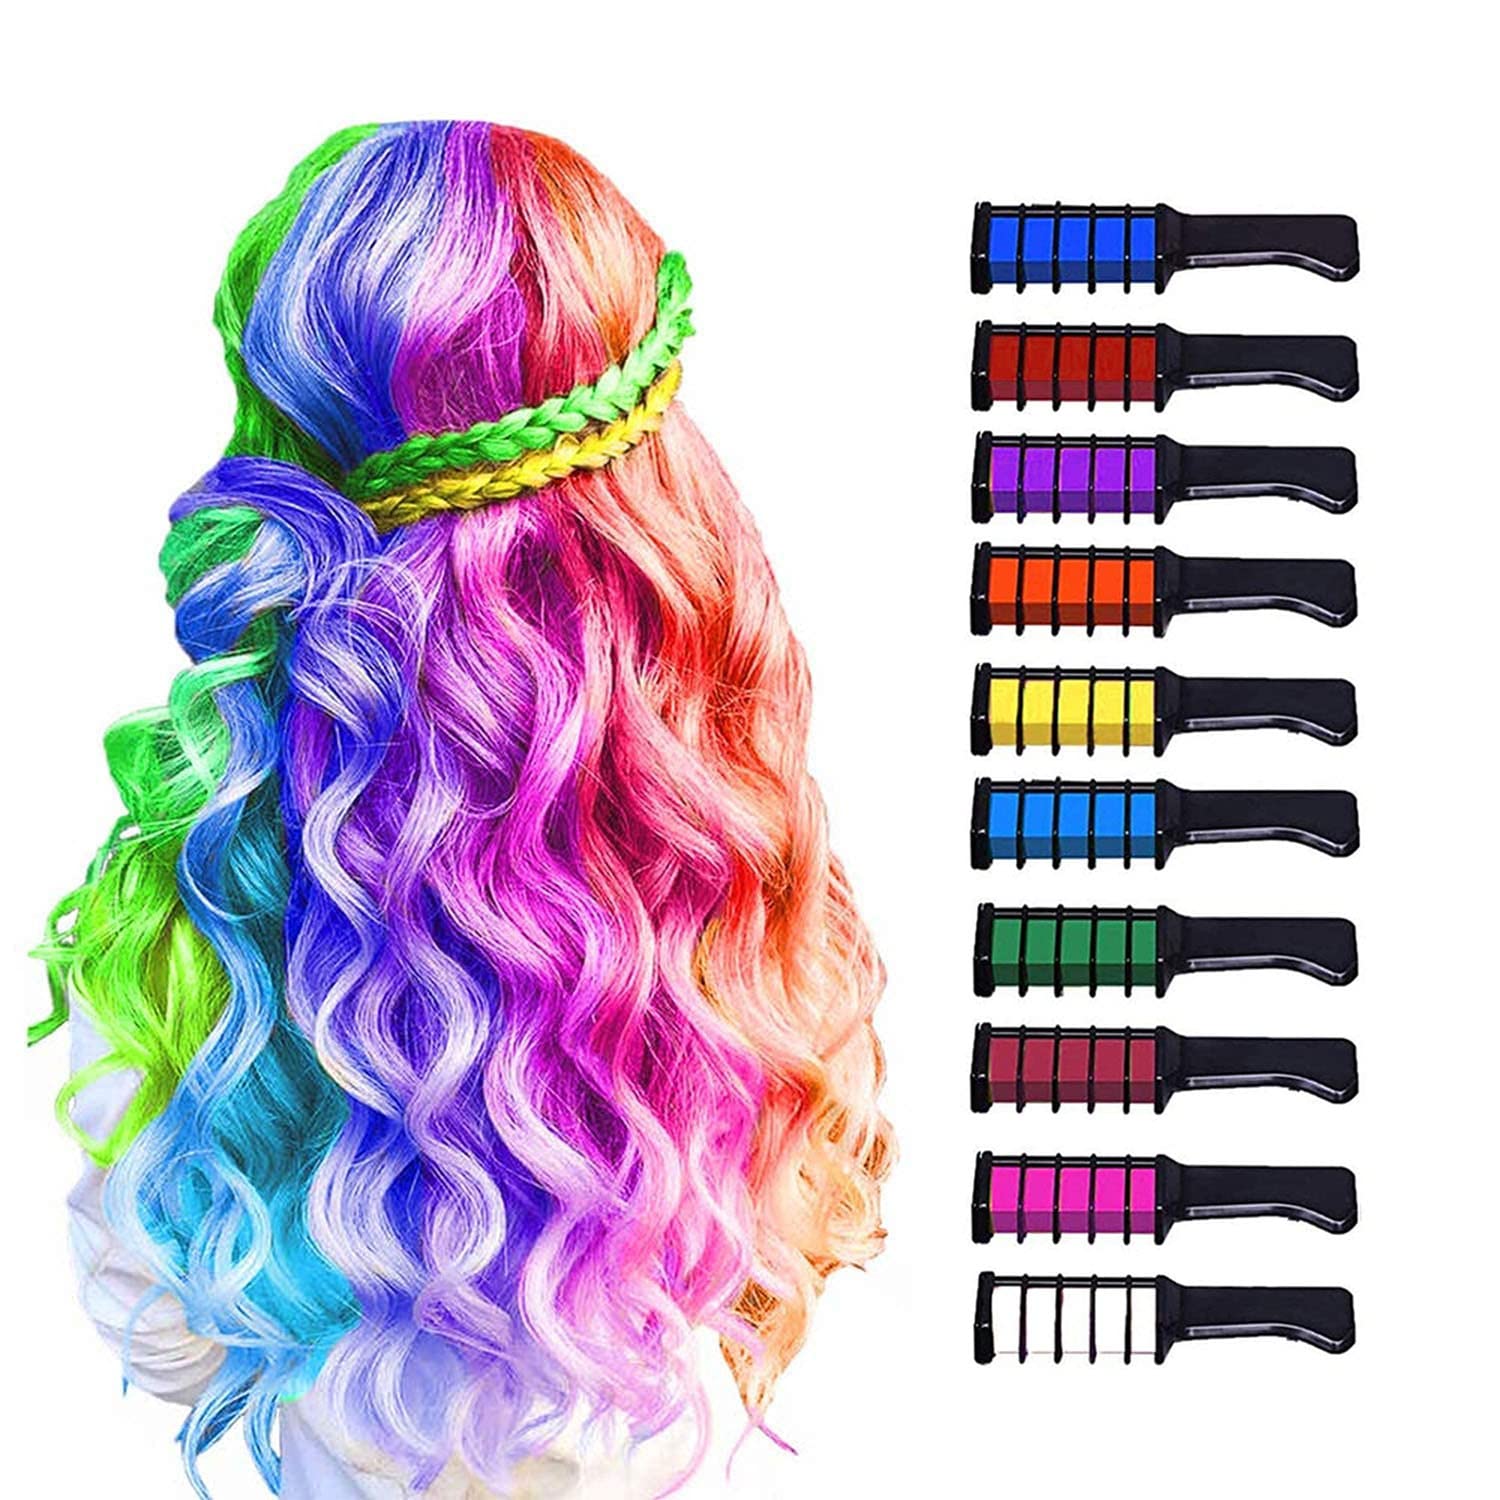 MSDADA Pack of 10 Hair Chalk Comb Temporary Dyeing Hair Colour Comb for Children Washable Non-Toxic Perfect for Girls Adults Birthday Party Thanksgiving Halloween Cosplay (Colourful), ‎colourful